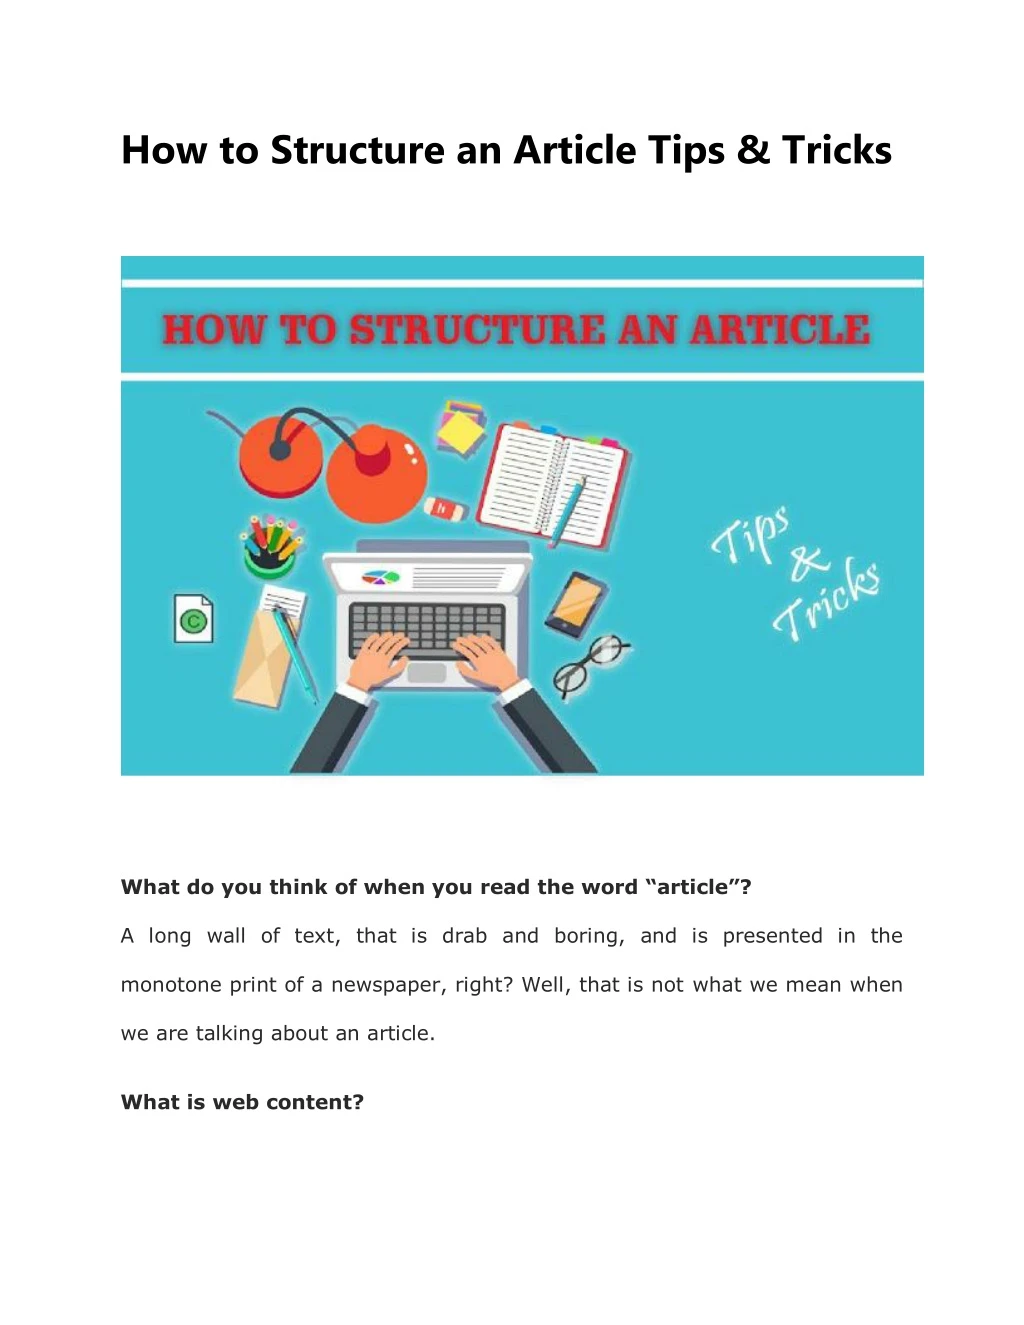 how to structure an article tips tricks n.